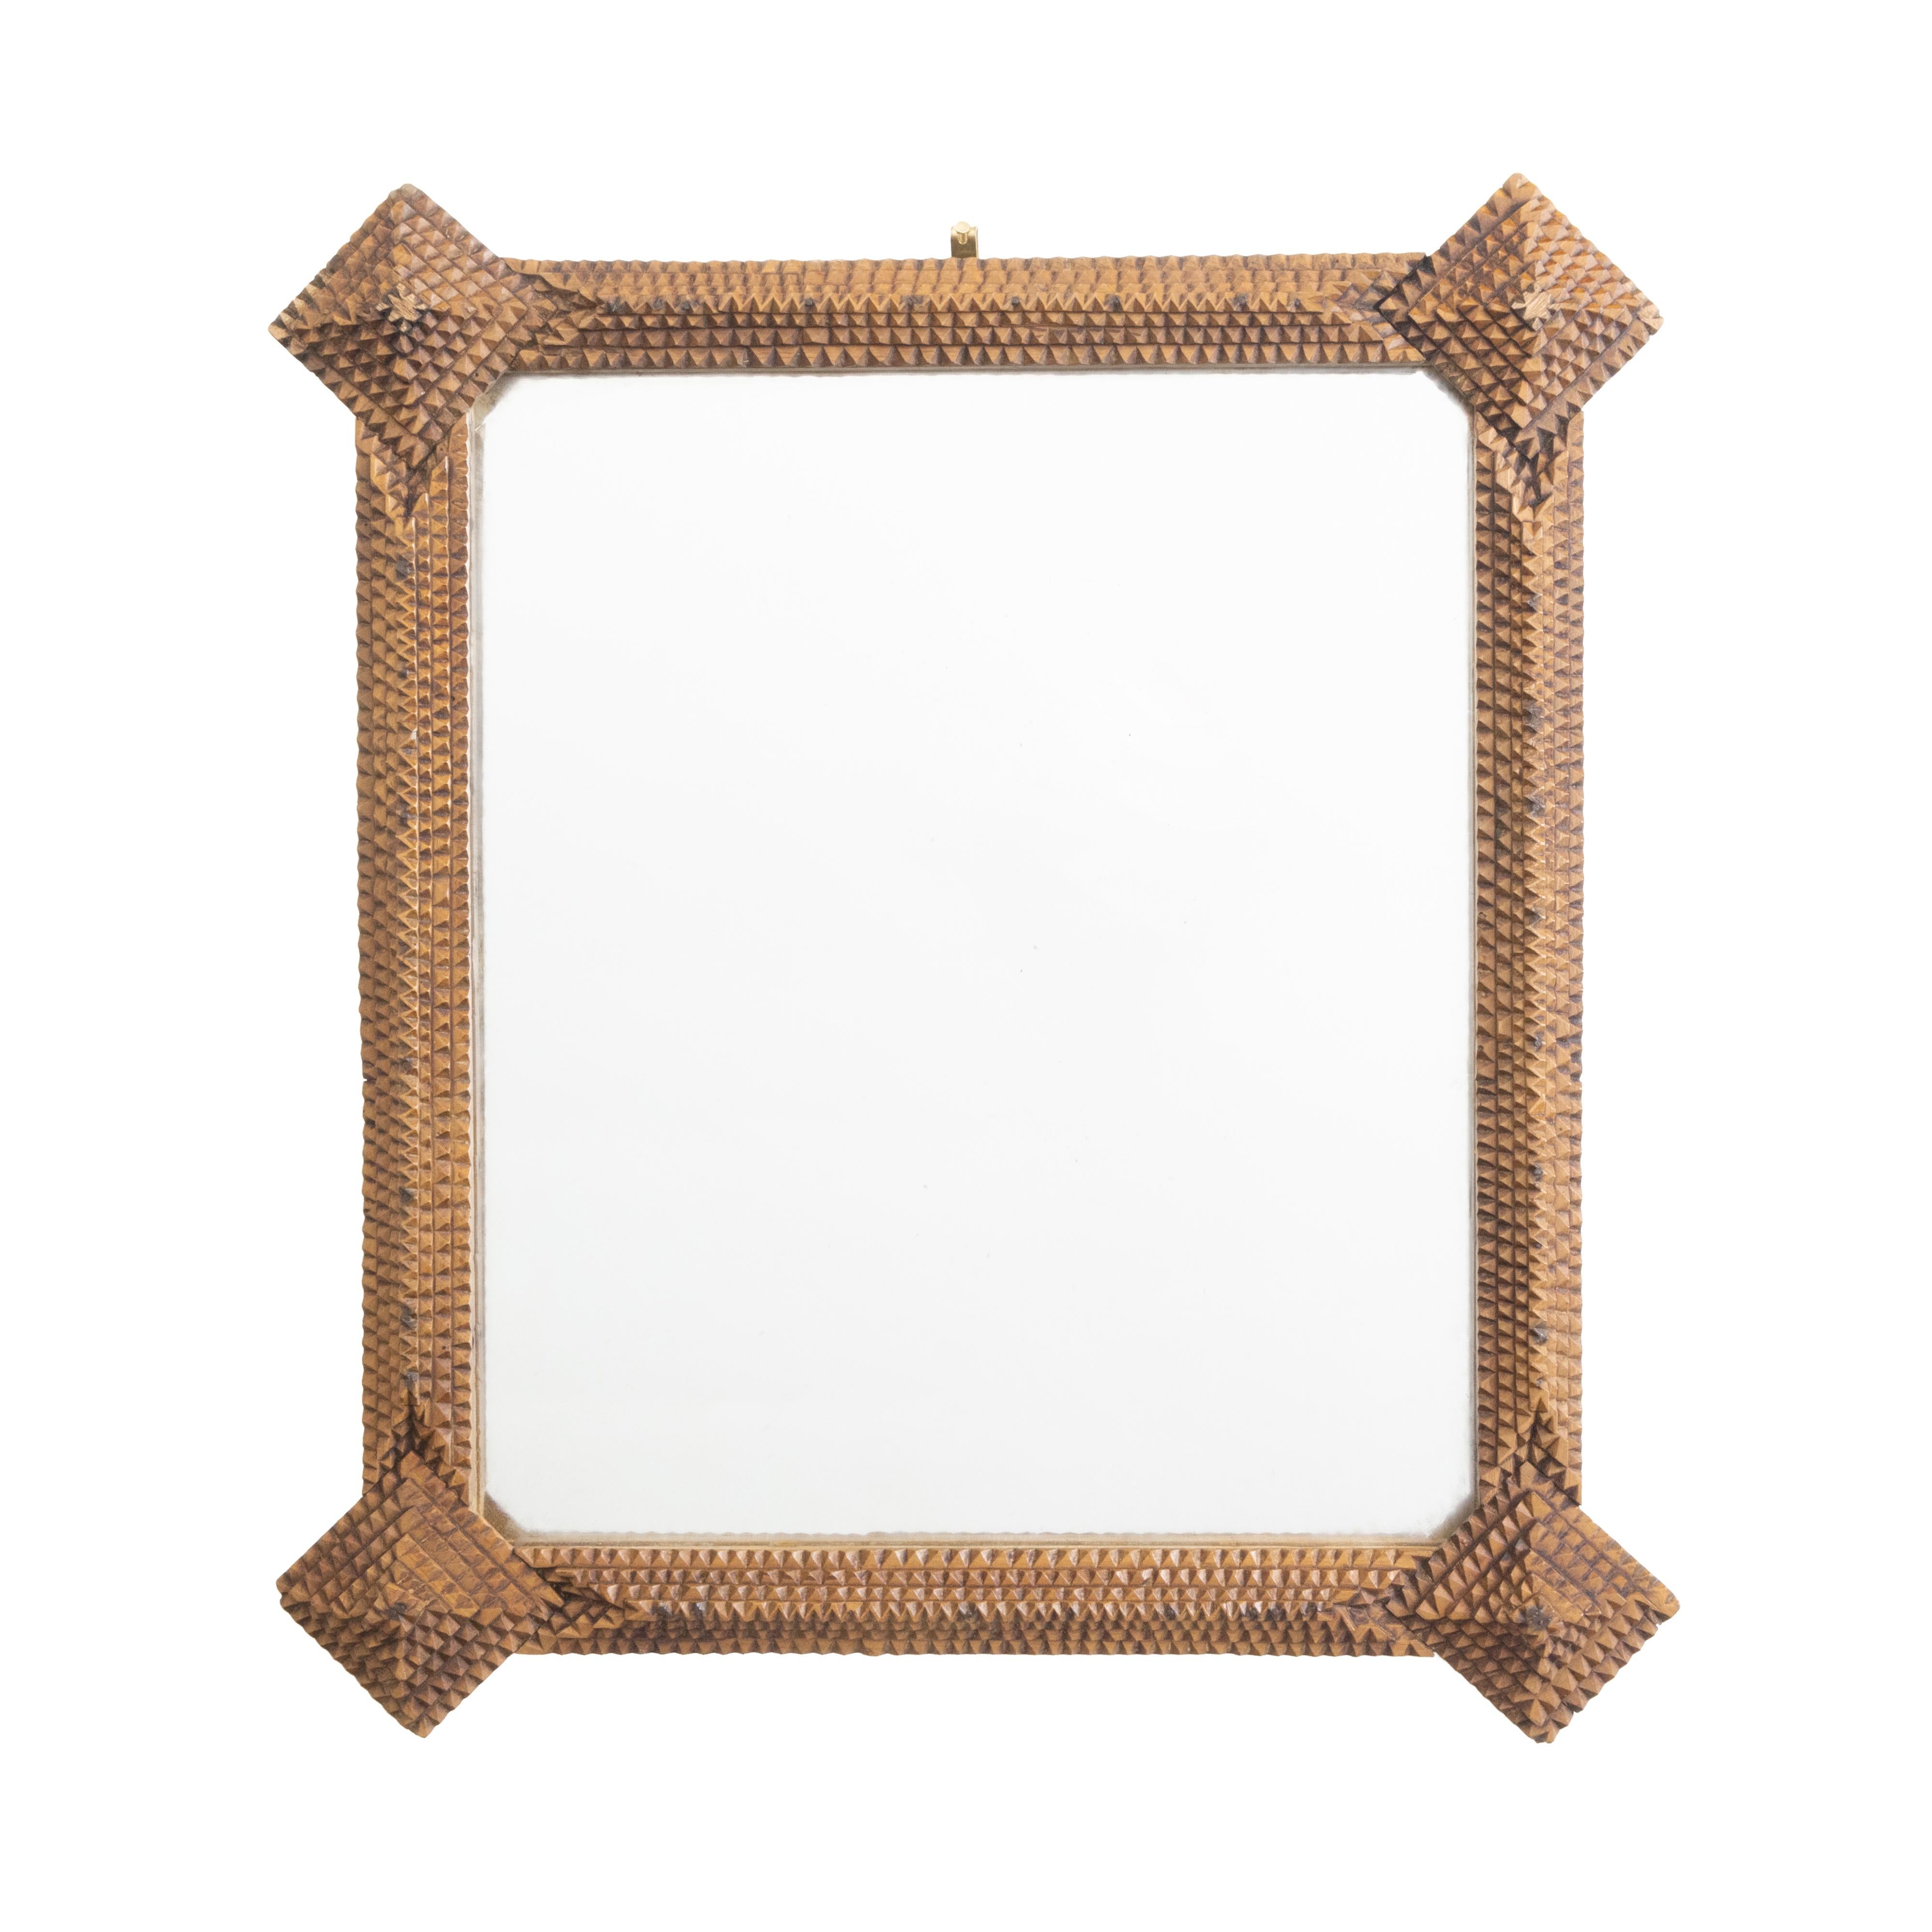 A French Tramp Art hand carved mirror from the Turn of the century, with pyramidal motifs in the corners. Created in France during the early years of the 20th century, this wall mirror was hand carved in the manner typical of the Tramp Art style.